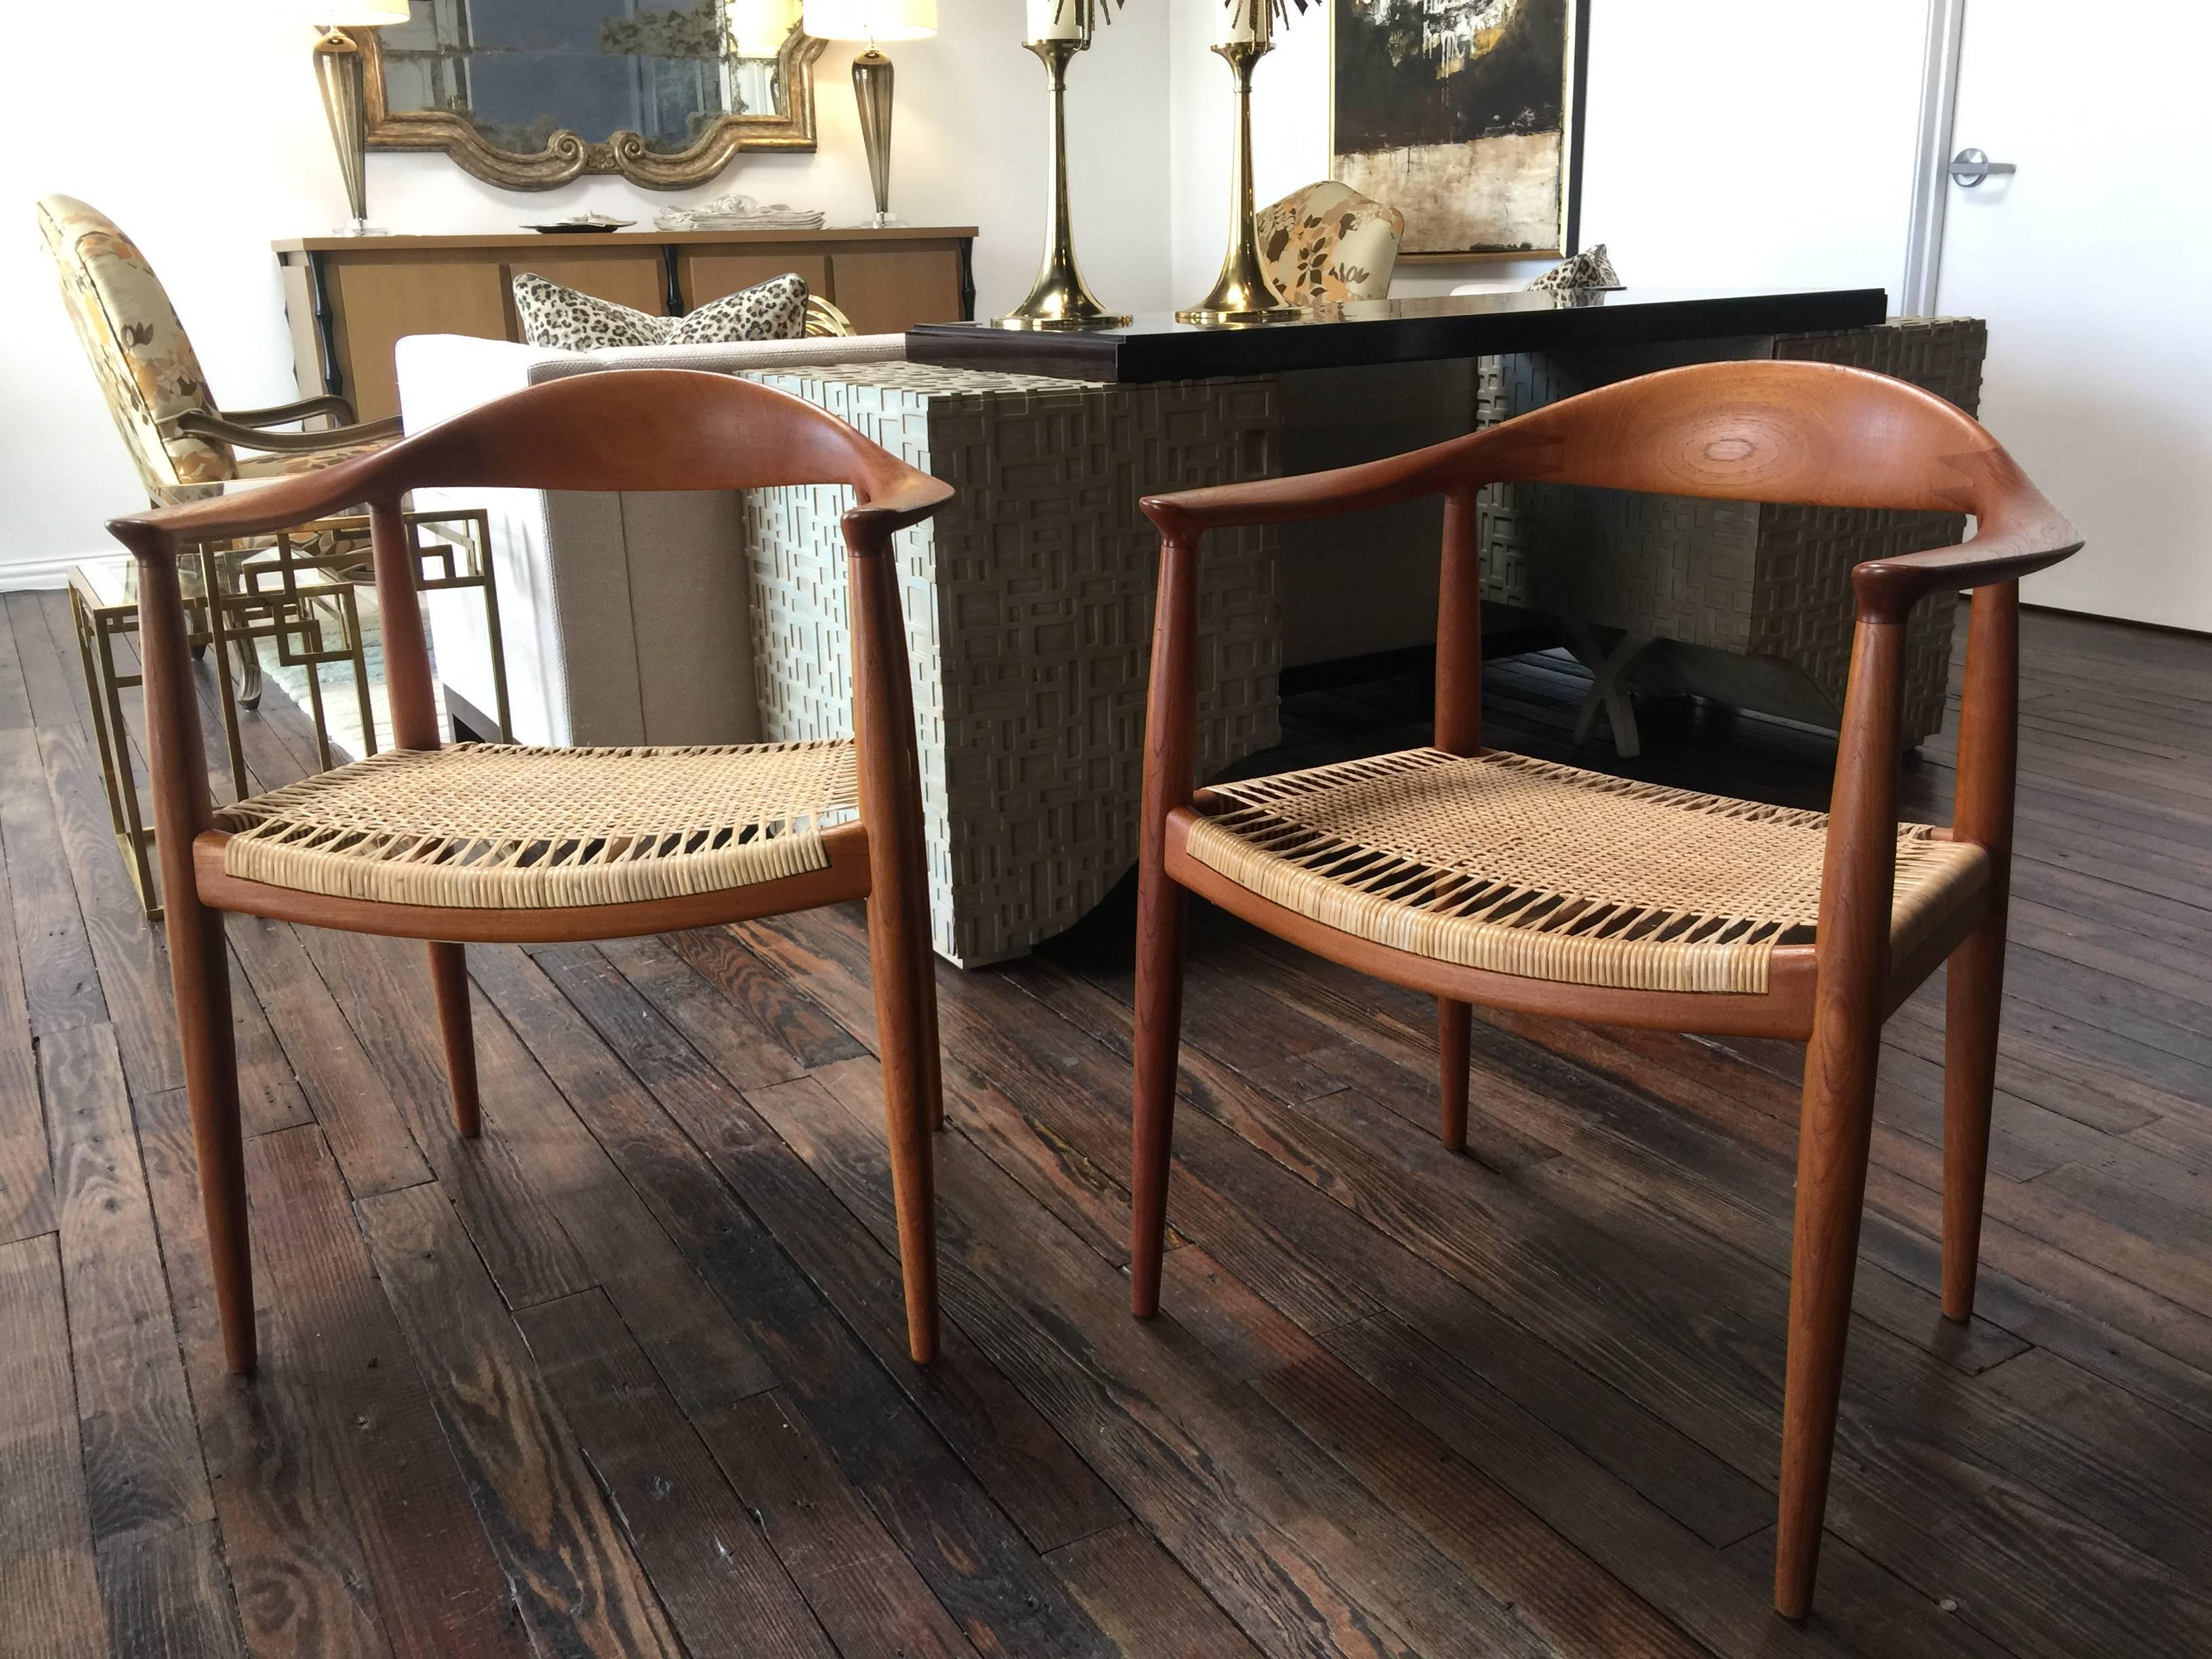 Beautiful pair of round chairs by Hans Wegner. Cane seats. One seat was replaced so a slight variation in color that will disappear over time. Both show very well.